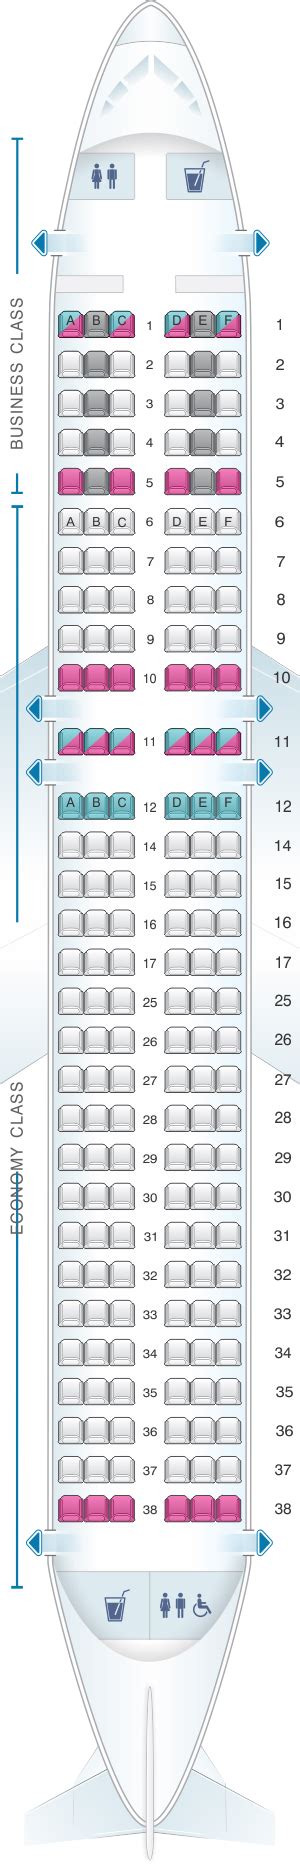 Airbus A320 Seating